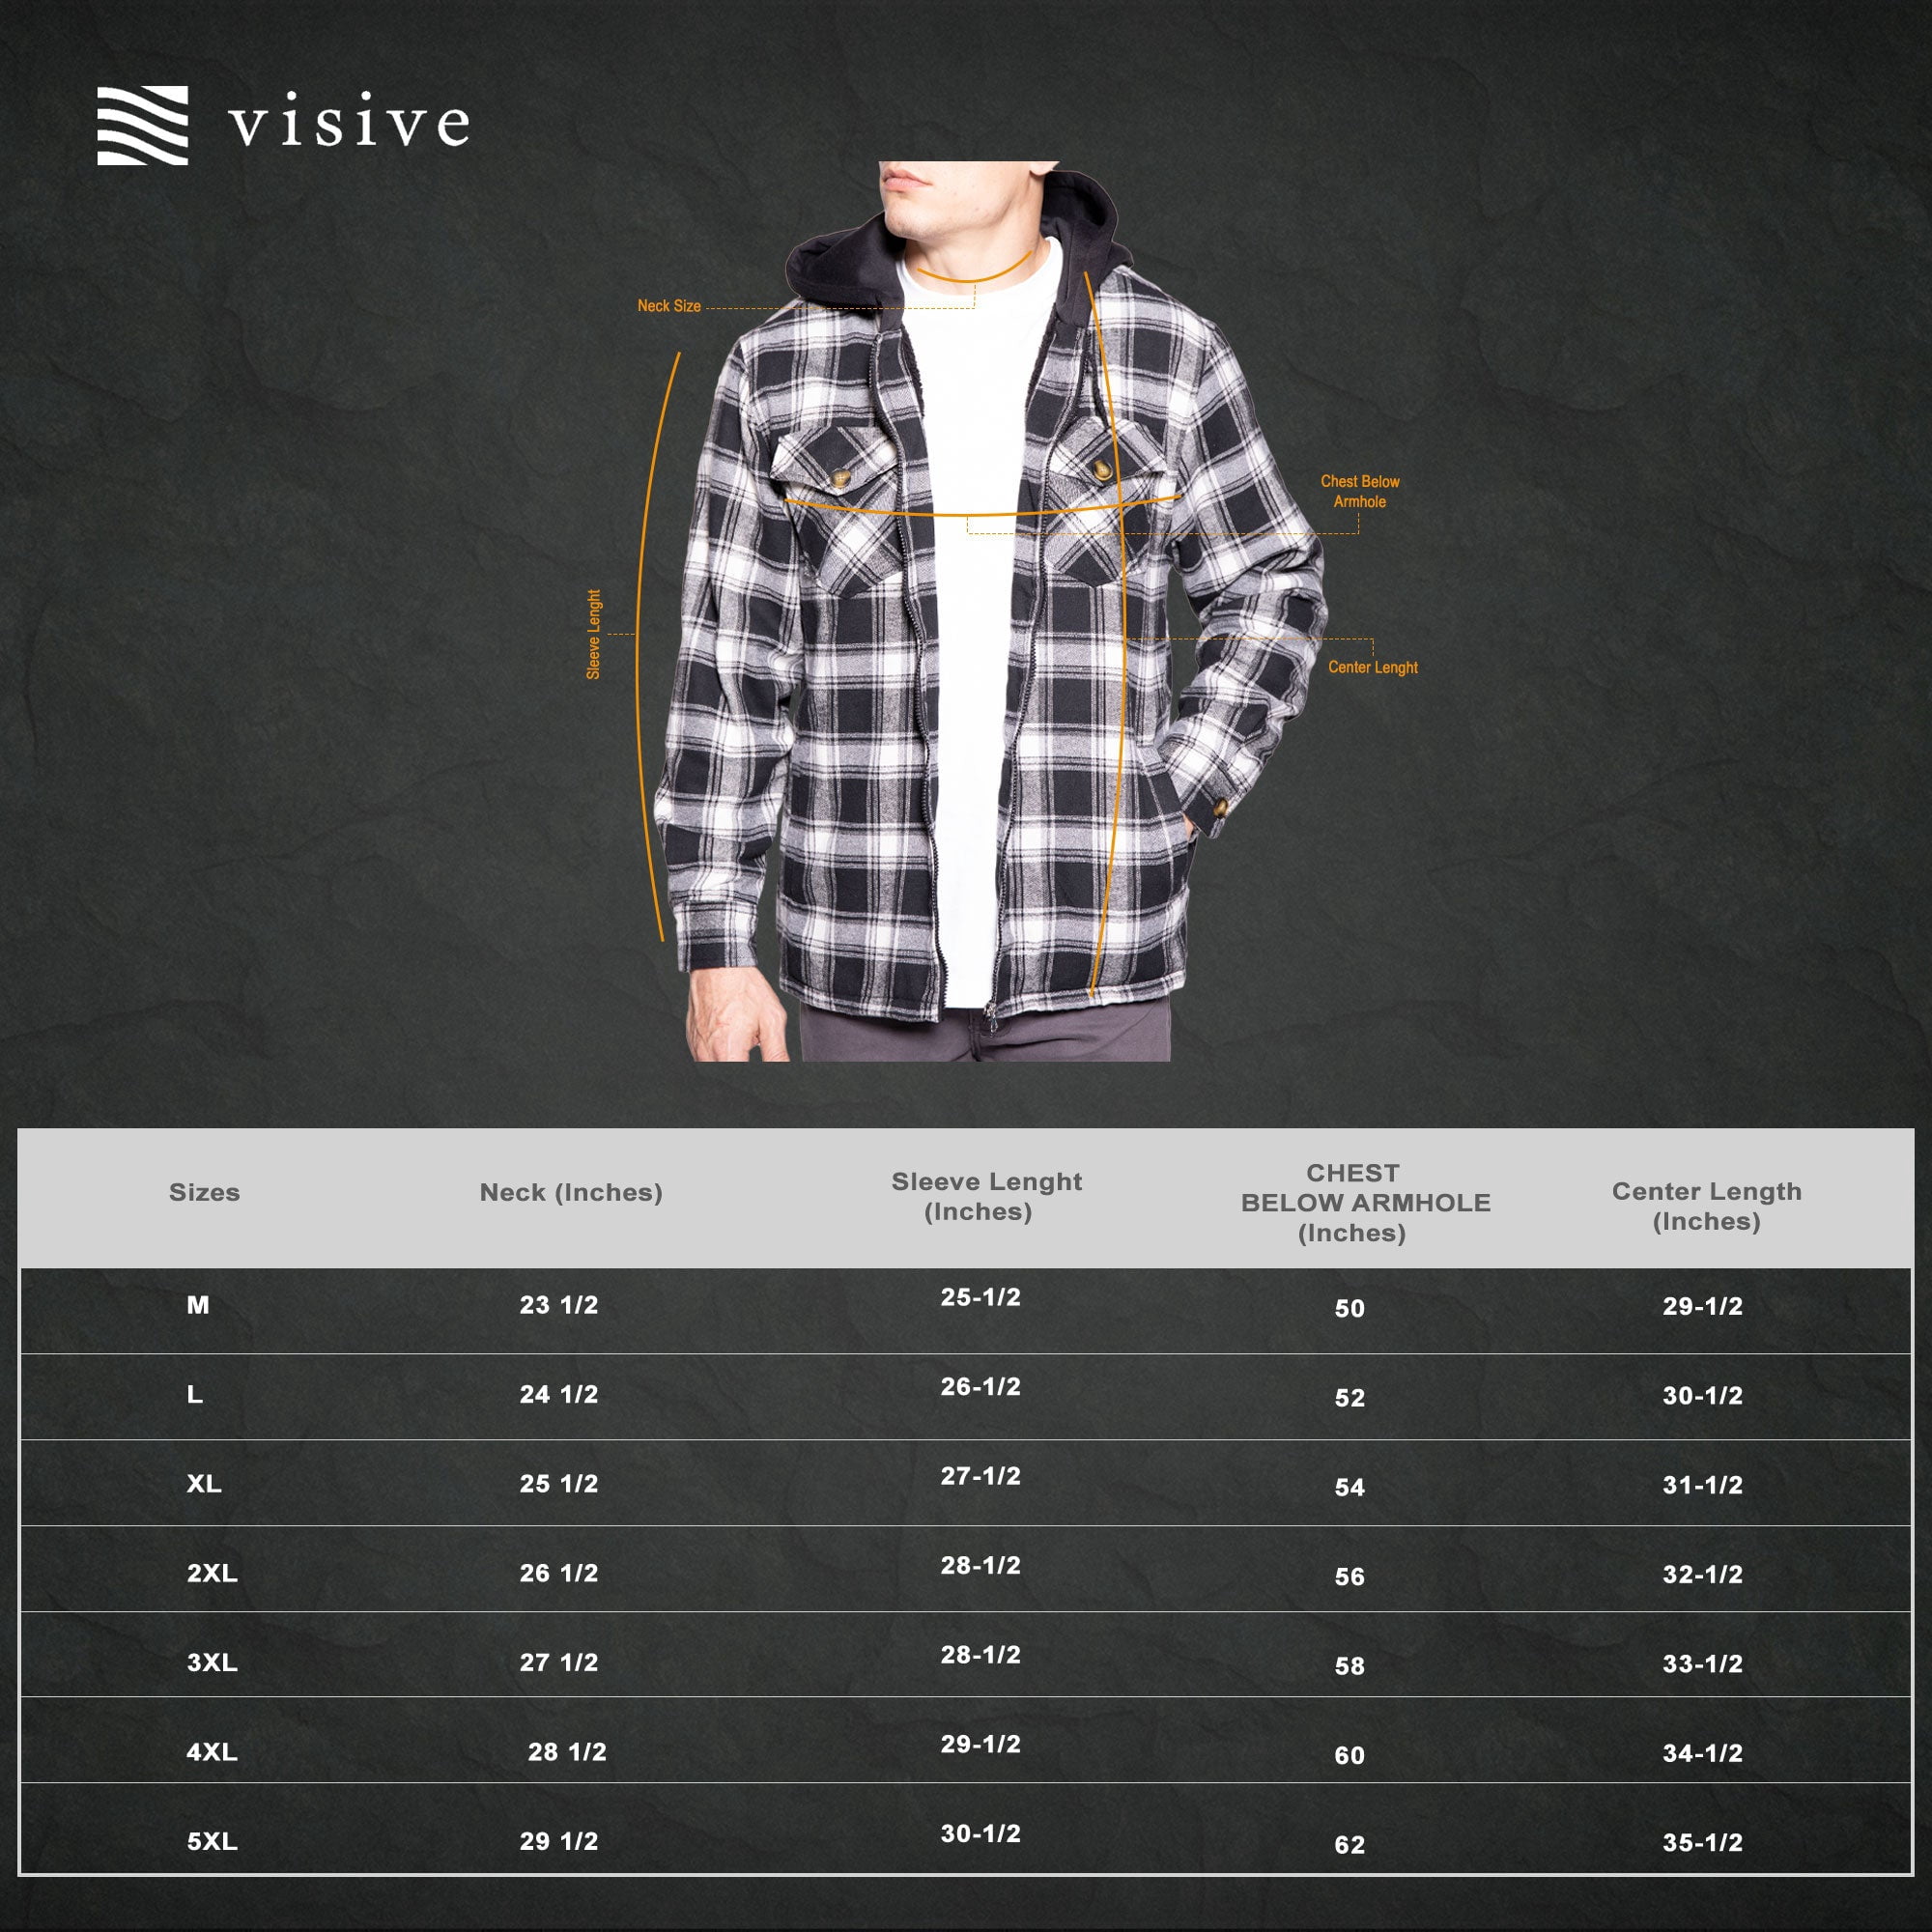 Visive Mens Heavy Sherpa Fleece-Lined Flannel Hooded Jacket - Big & Tall Sizes - Warm Zip Up Hoodie Jacket for Cold Weather - Perfect for Outdoor Activities - Durable & Fashion-Forward - image 6 of 6